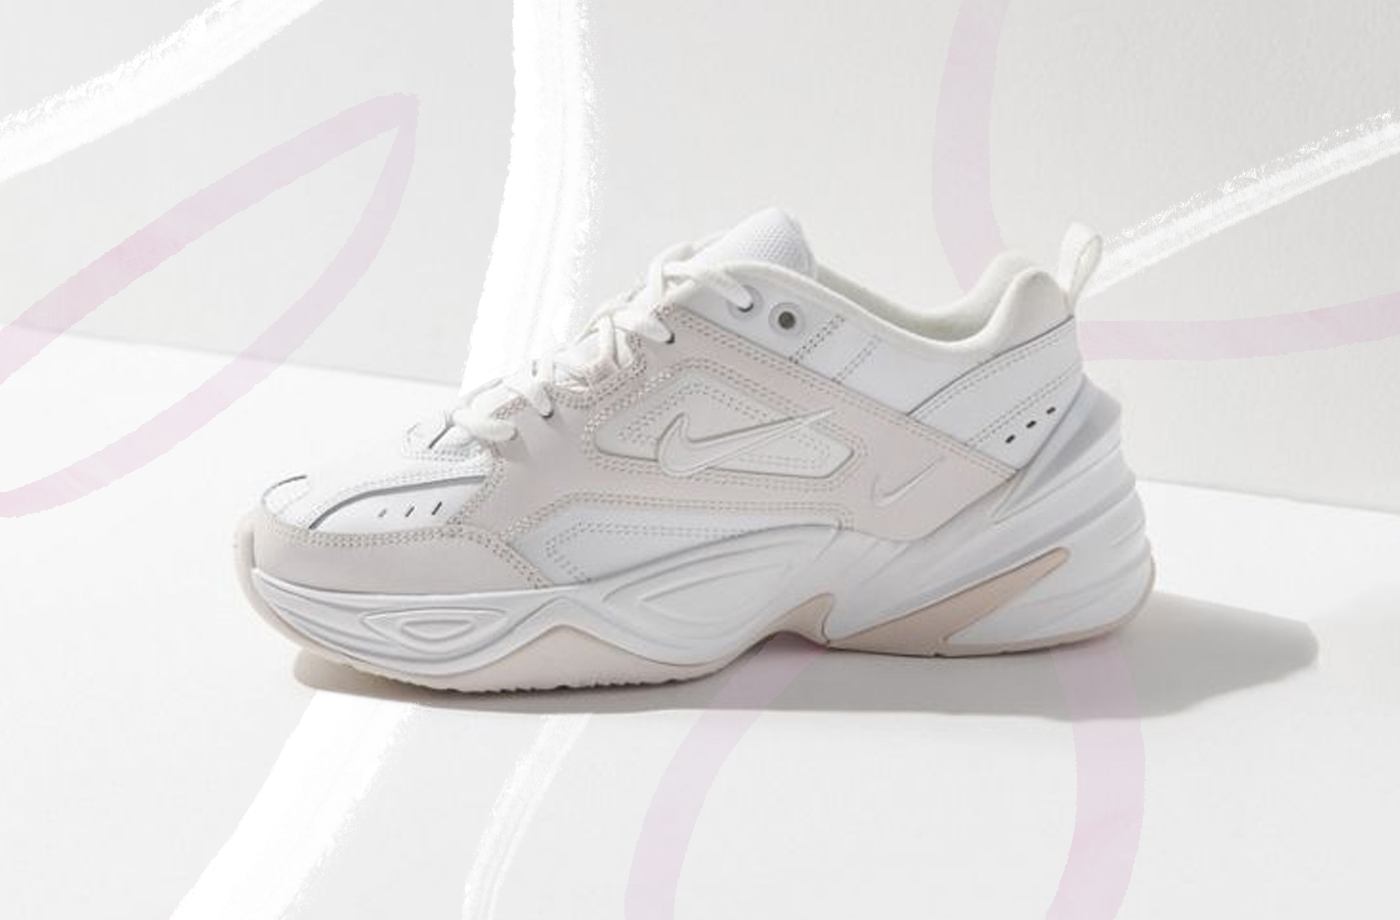 Nike M2K Tekno is queen of the top sneakers for women